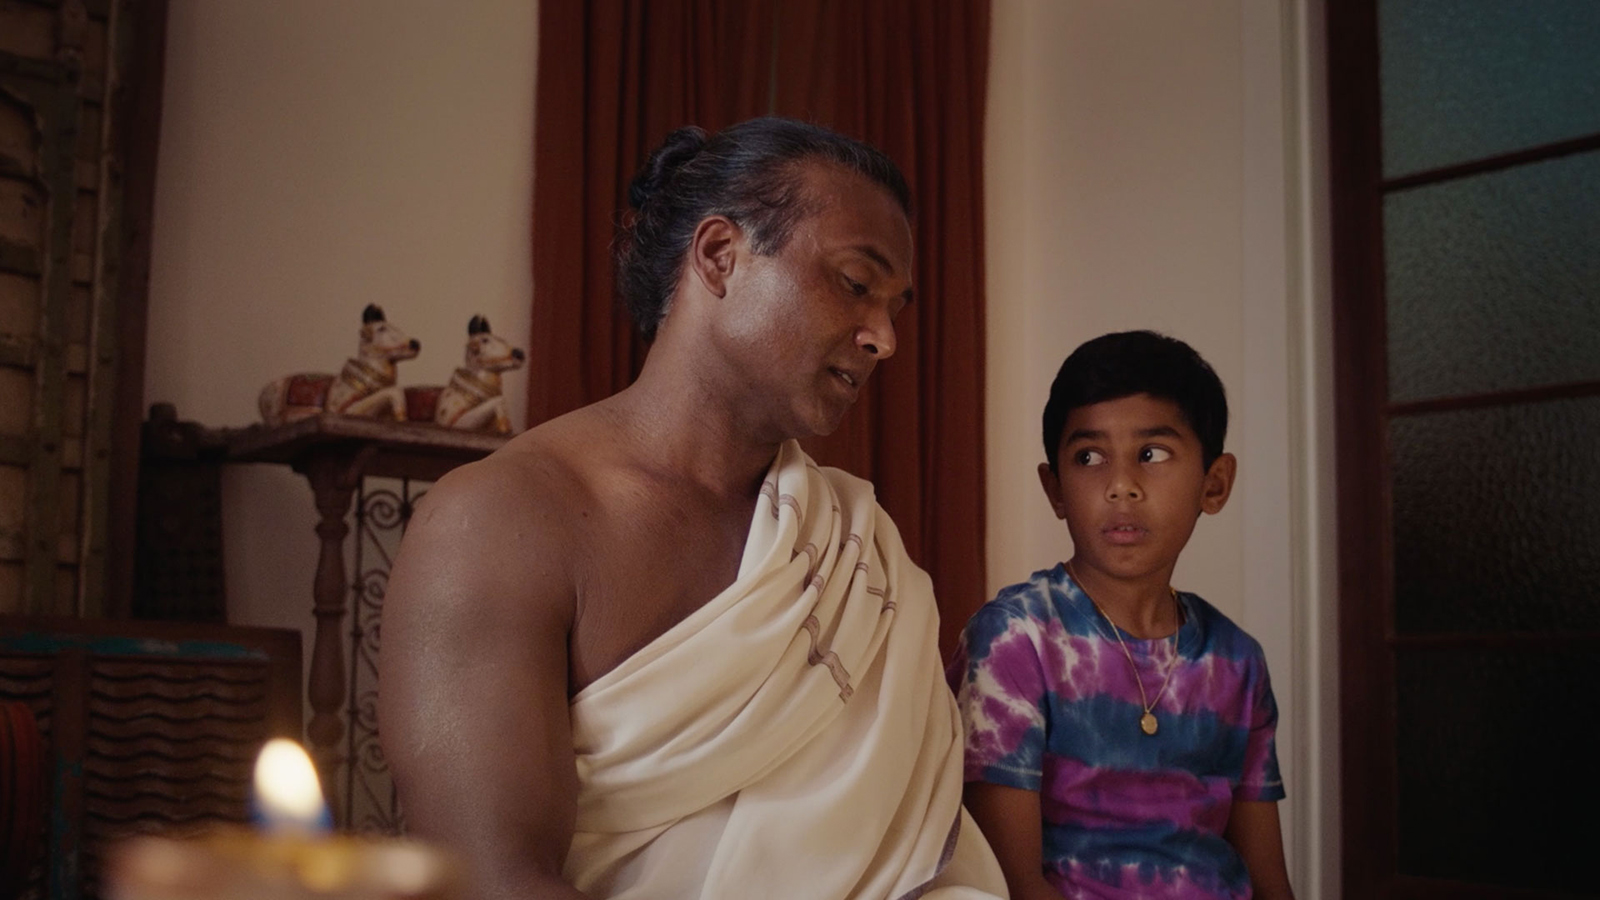 Actors Ravi Chand, left, and Emil Jayan in "Namaste Yoga." (Photo © Warrior Tribe Films)